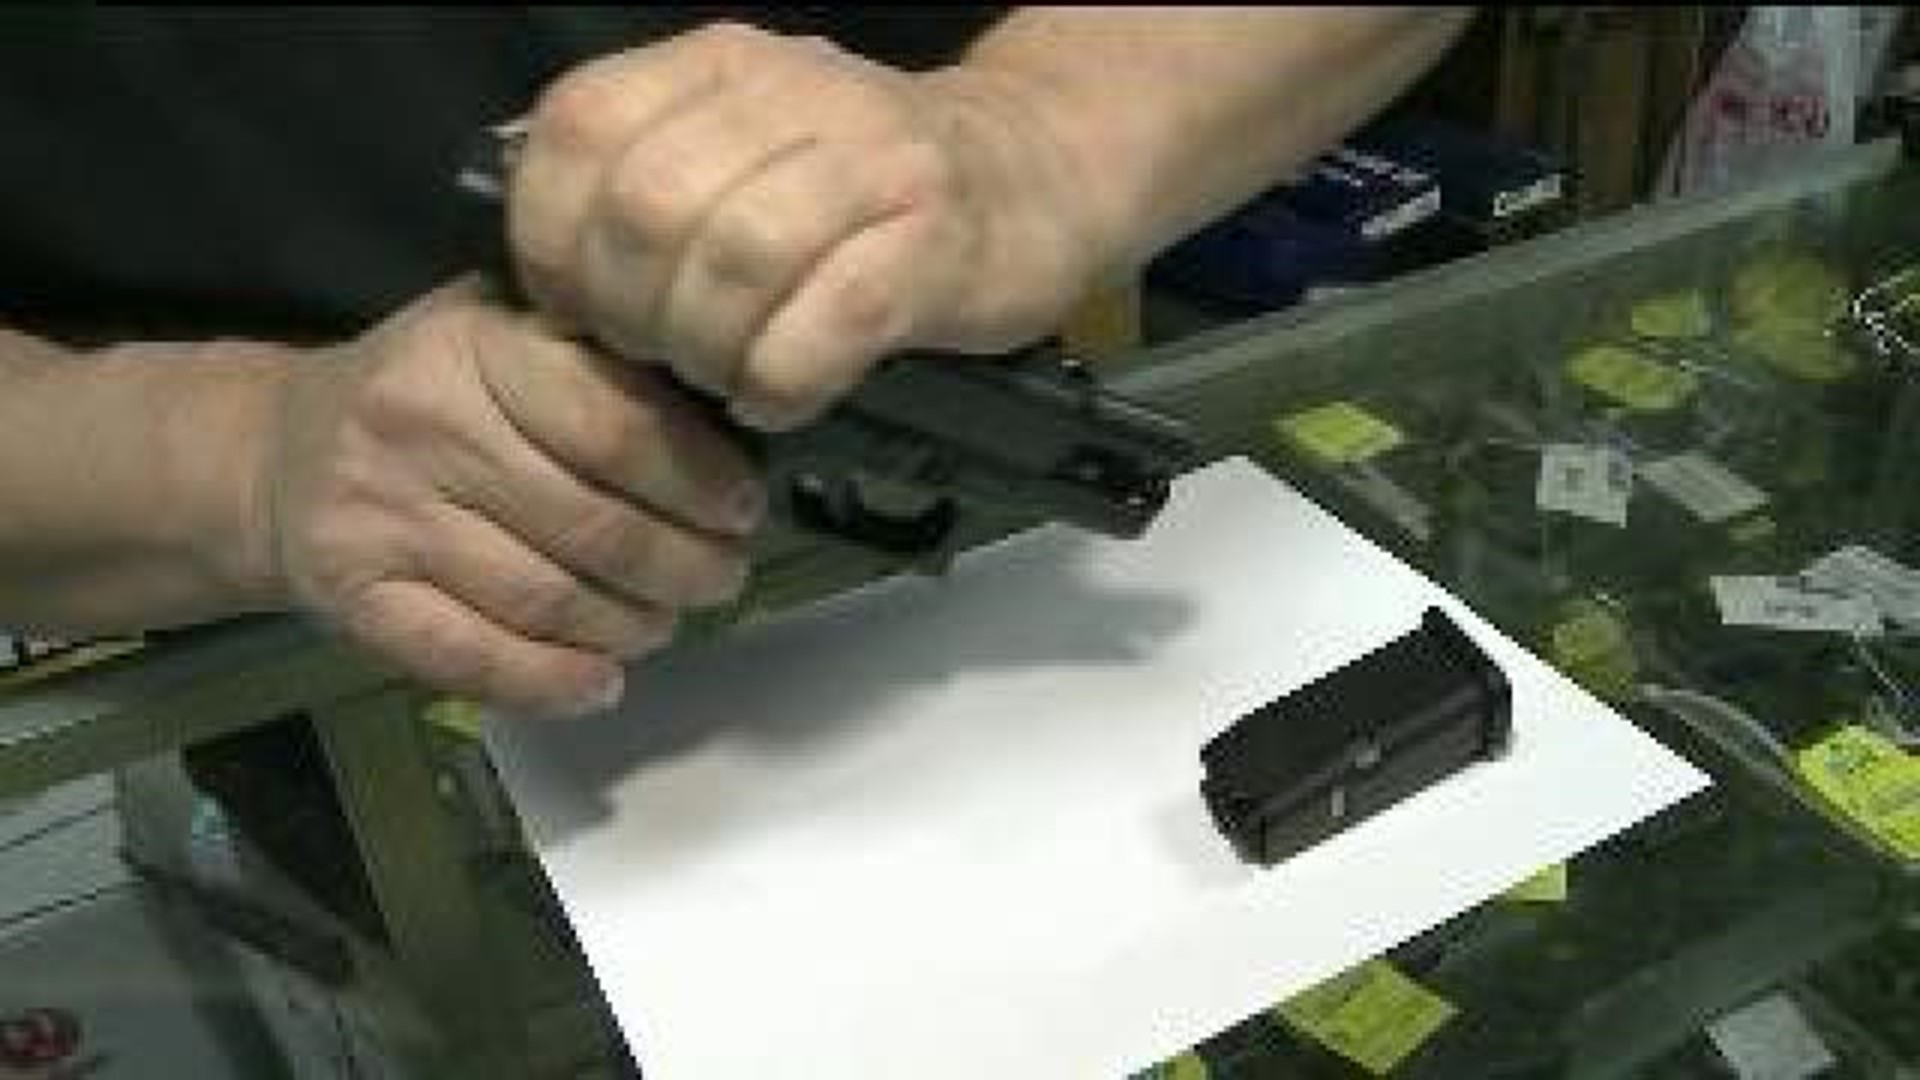 Could Gun Used in Deadly Shooting be Safer?